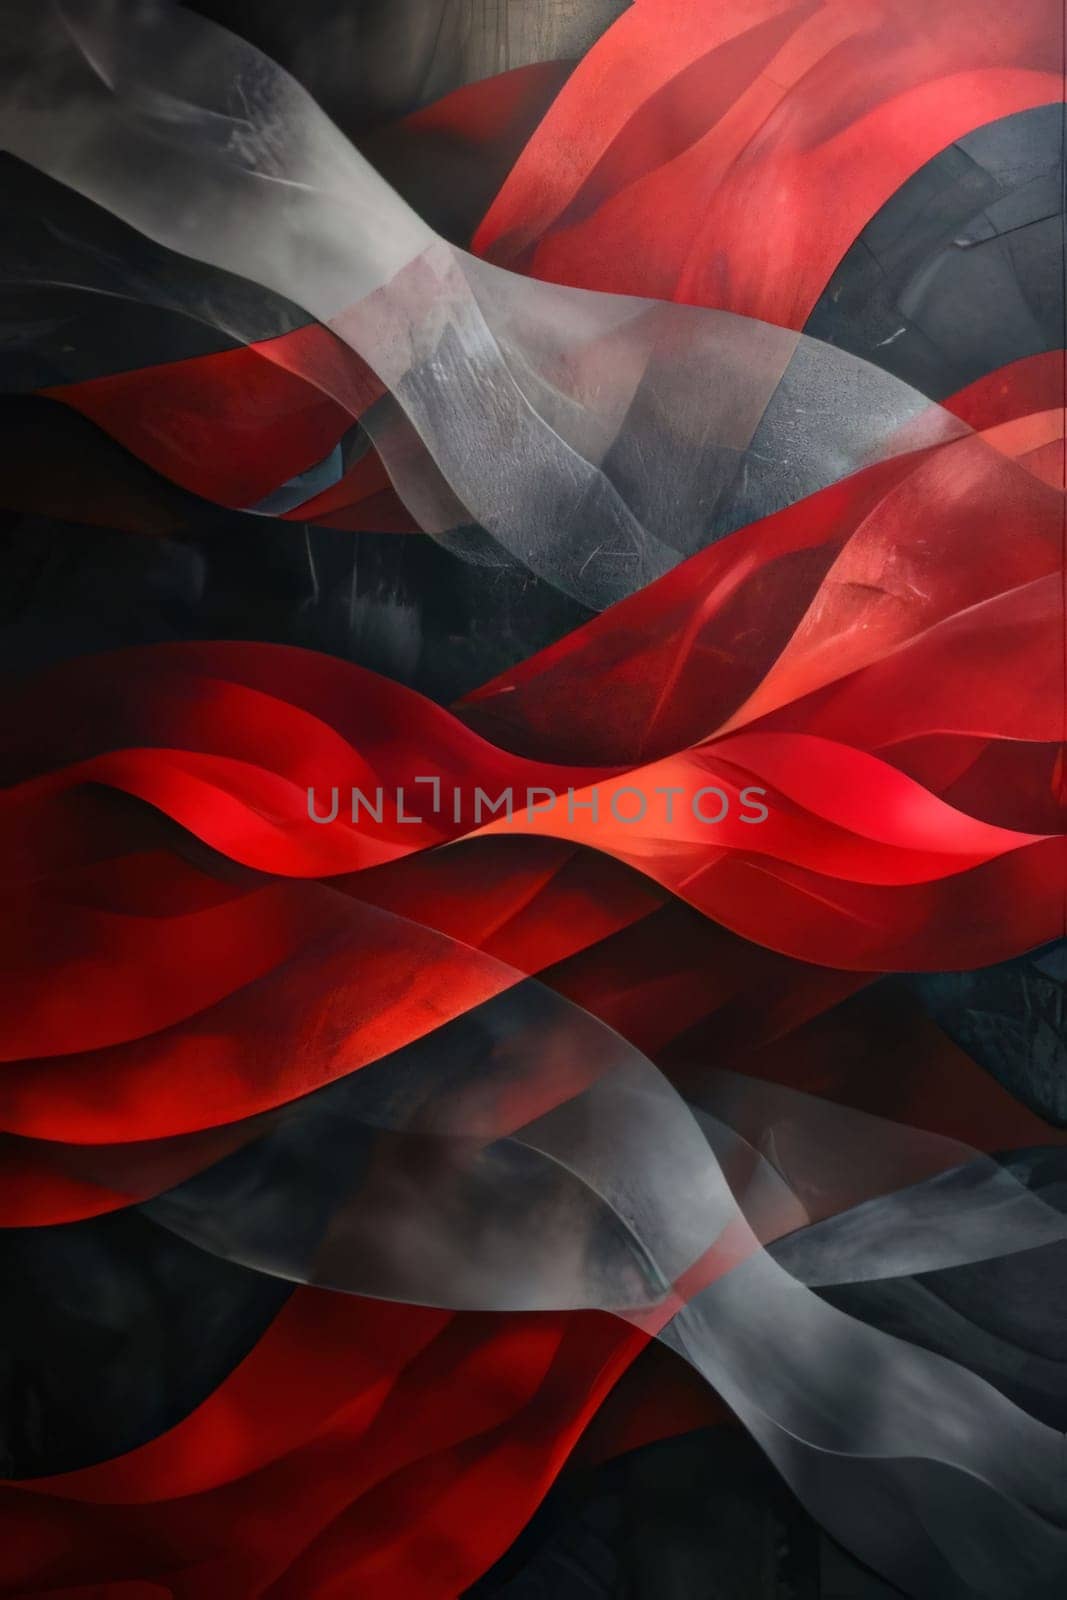 Abstract background design: abstract background with red and black drapery on a black background